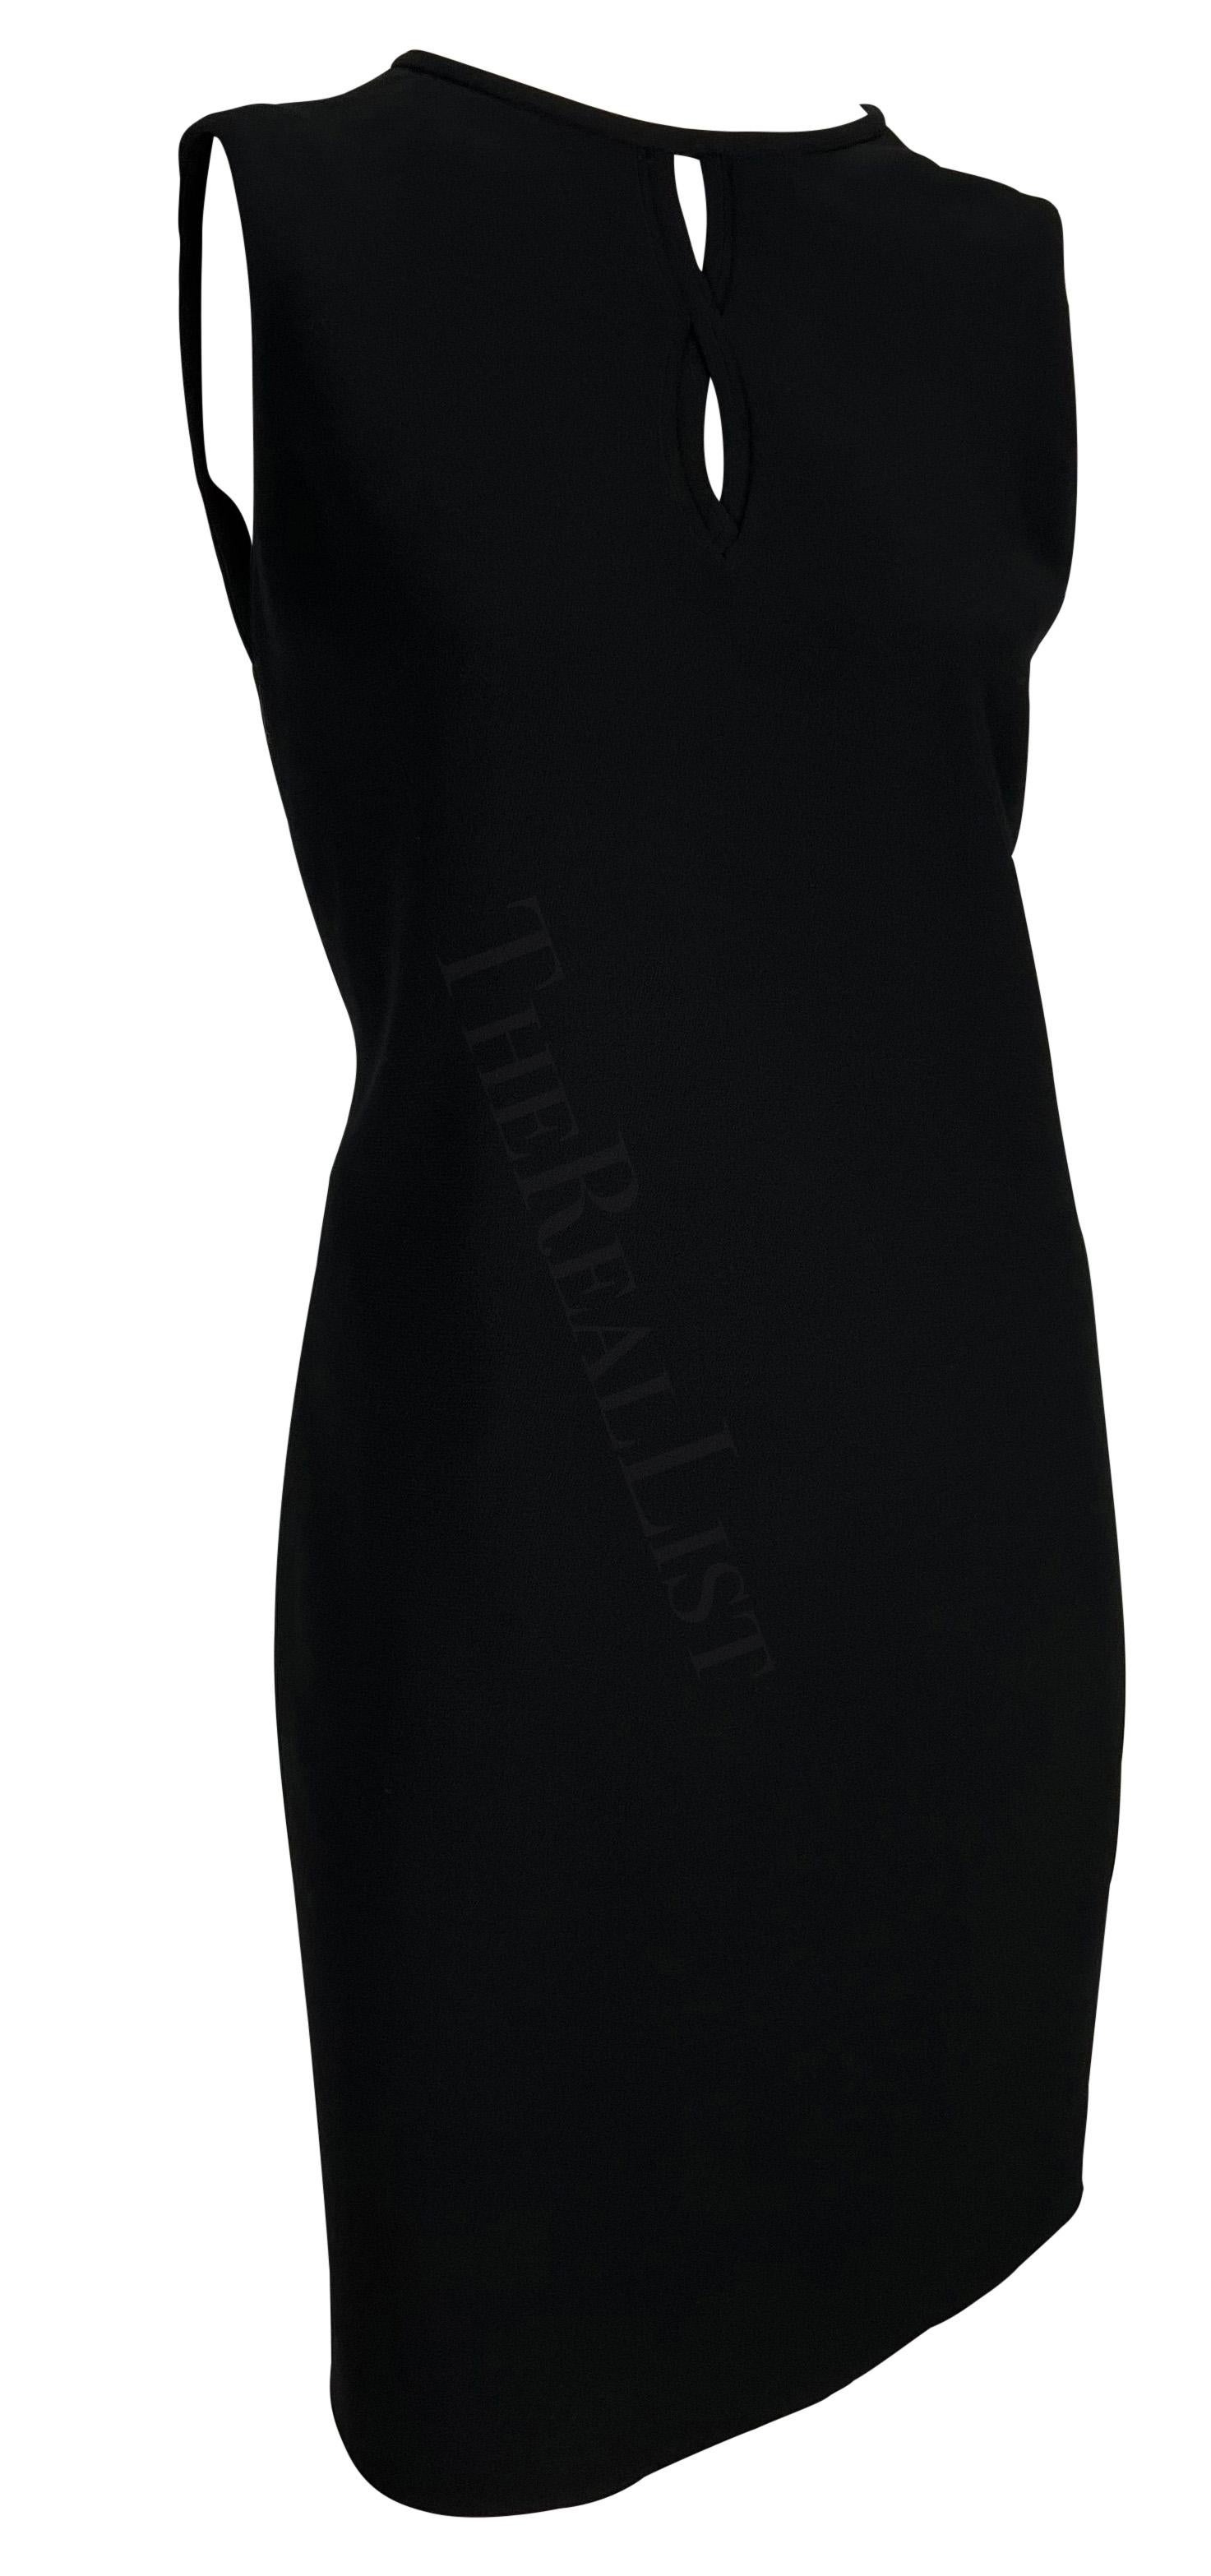 NWT F/W 1997 Gianni Versace Couture Cutout Black Wool Shift Dress For Sale 3